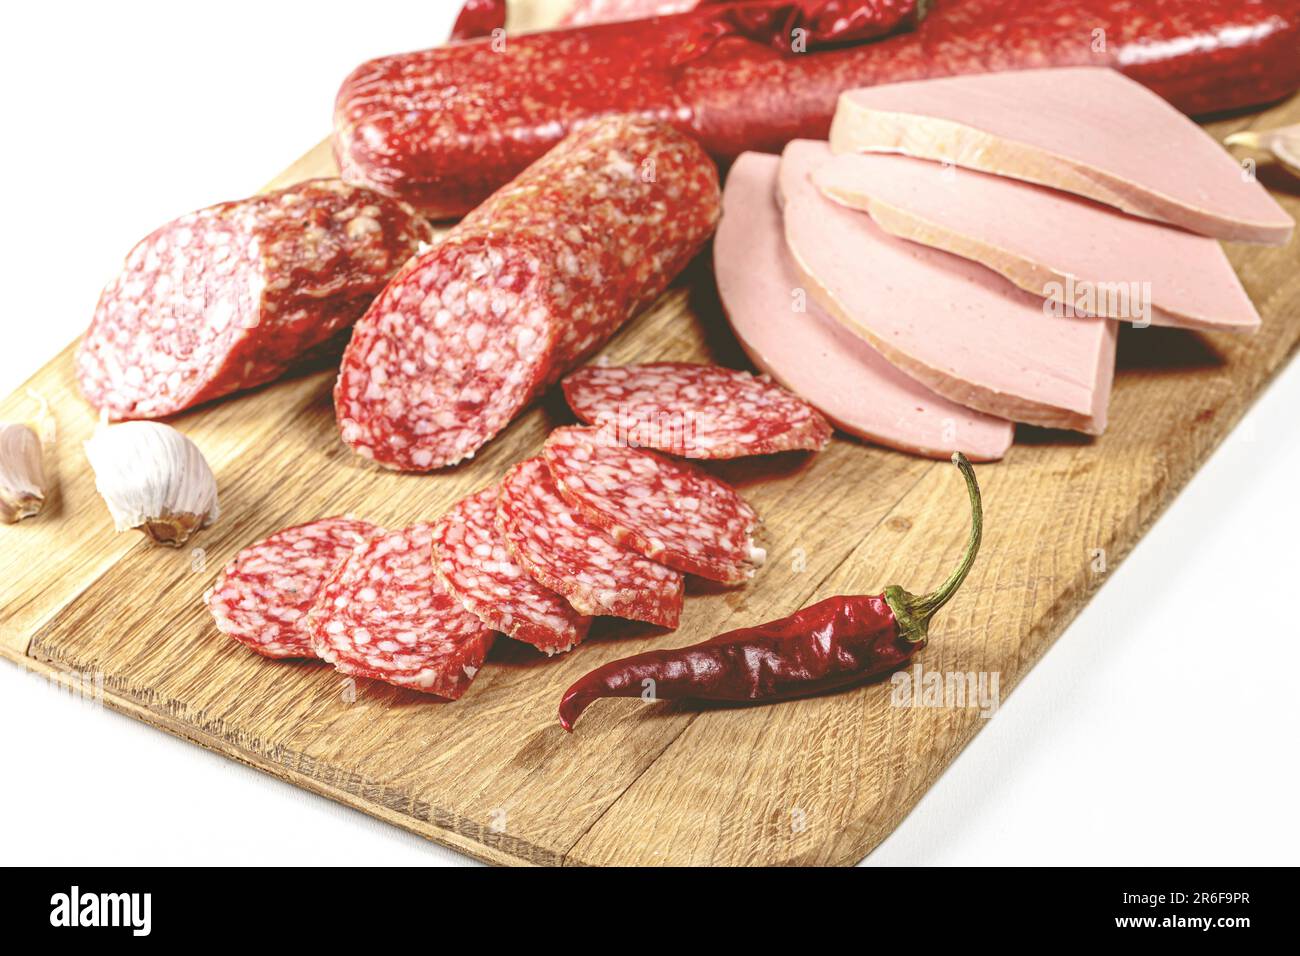 A close-up of a cutting board with an array of diced and sliced meats and vegetables, arranged in an aesthetically pleasing spread Stock Photo